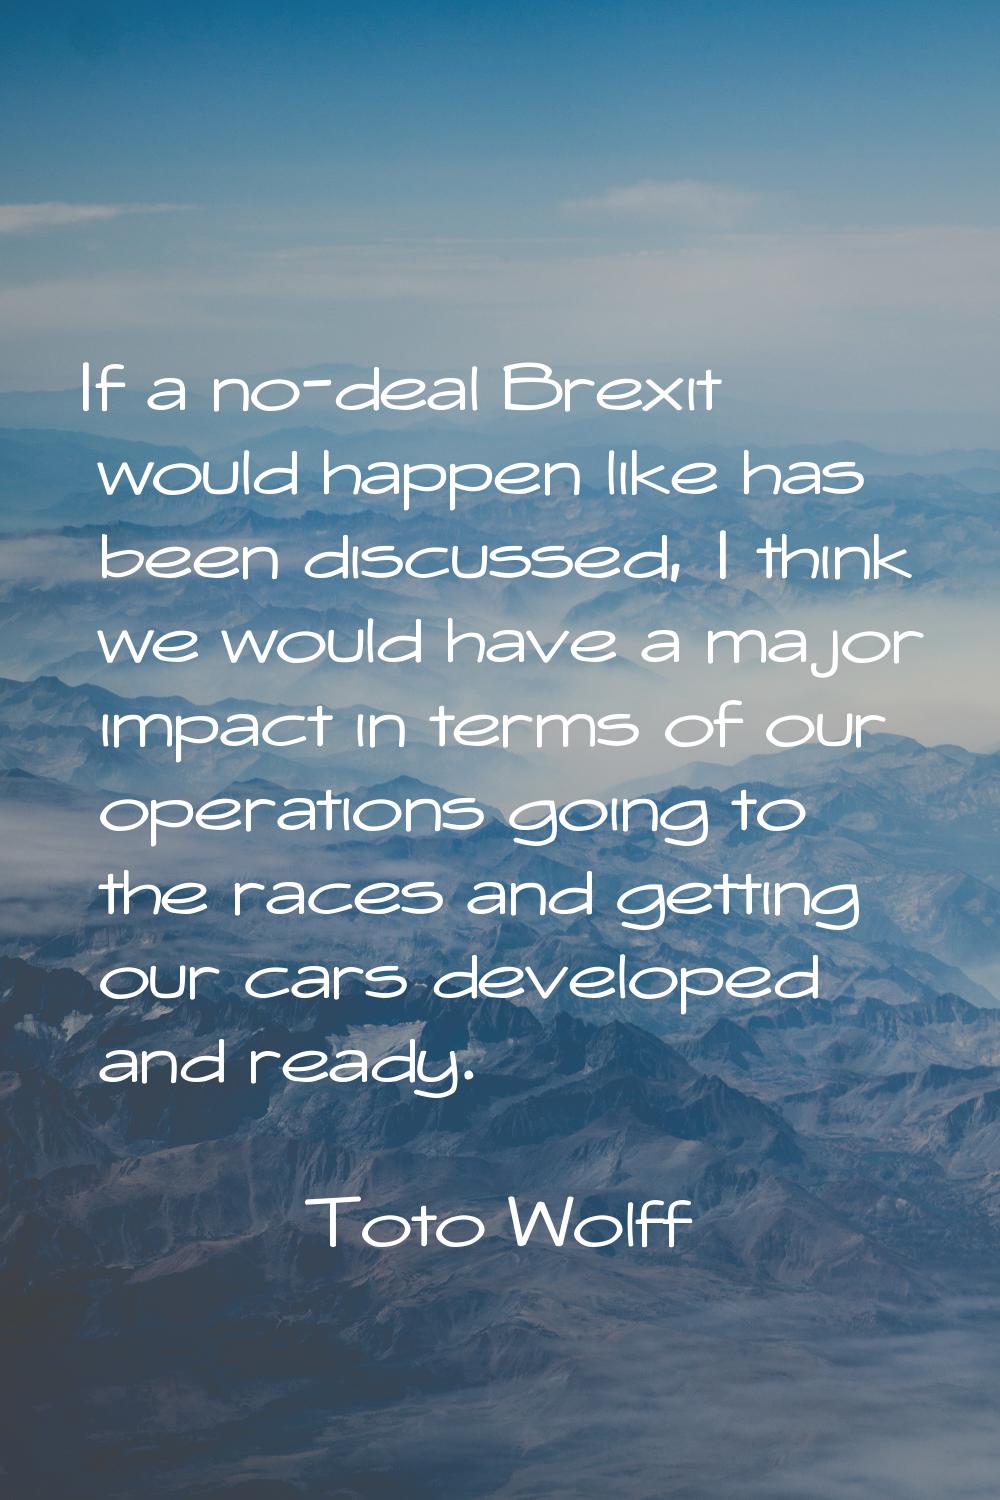 If a no-deal Brexit would happen like has been discussed, I think we would have a major impact in t